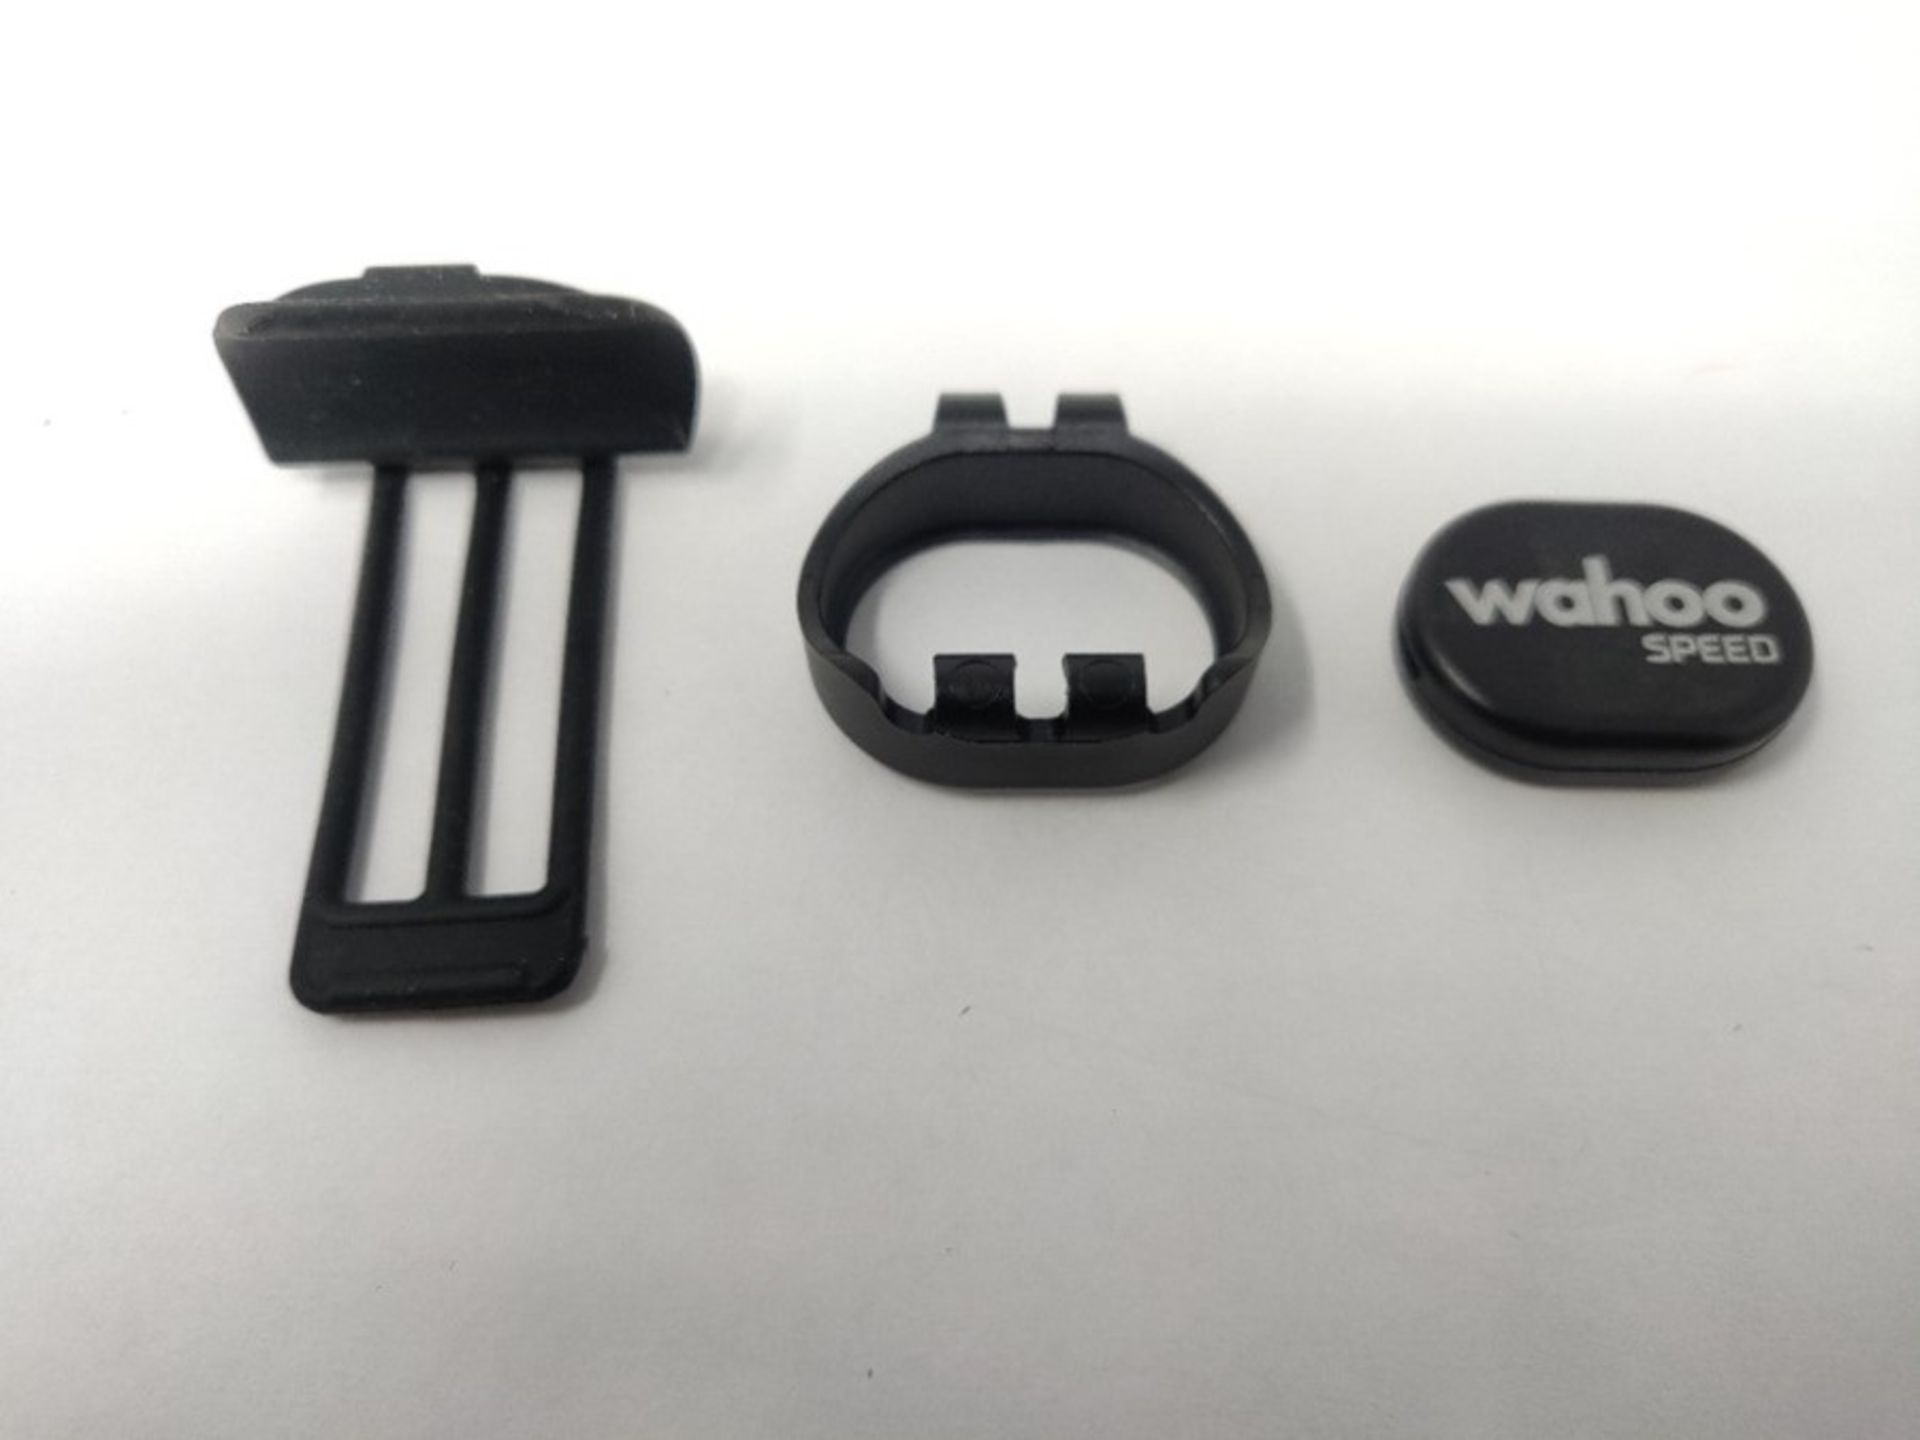 Wahoo RPM Speed Sensor for iPhone, Android and Bike Computers - Image 3 of 3